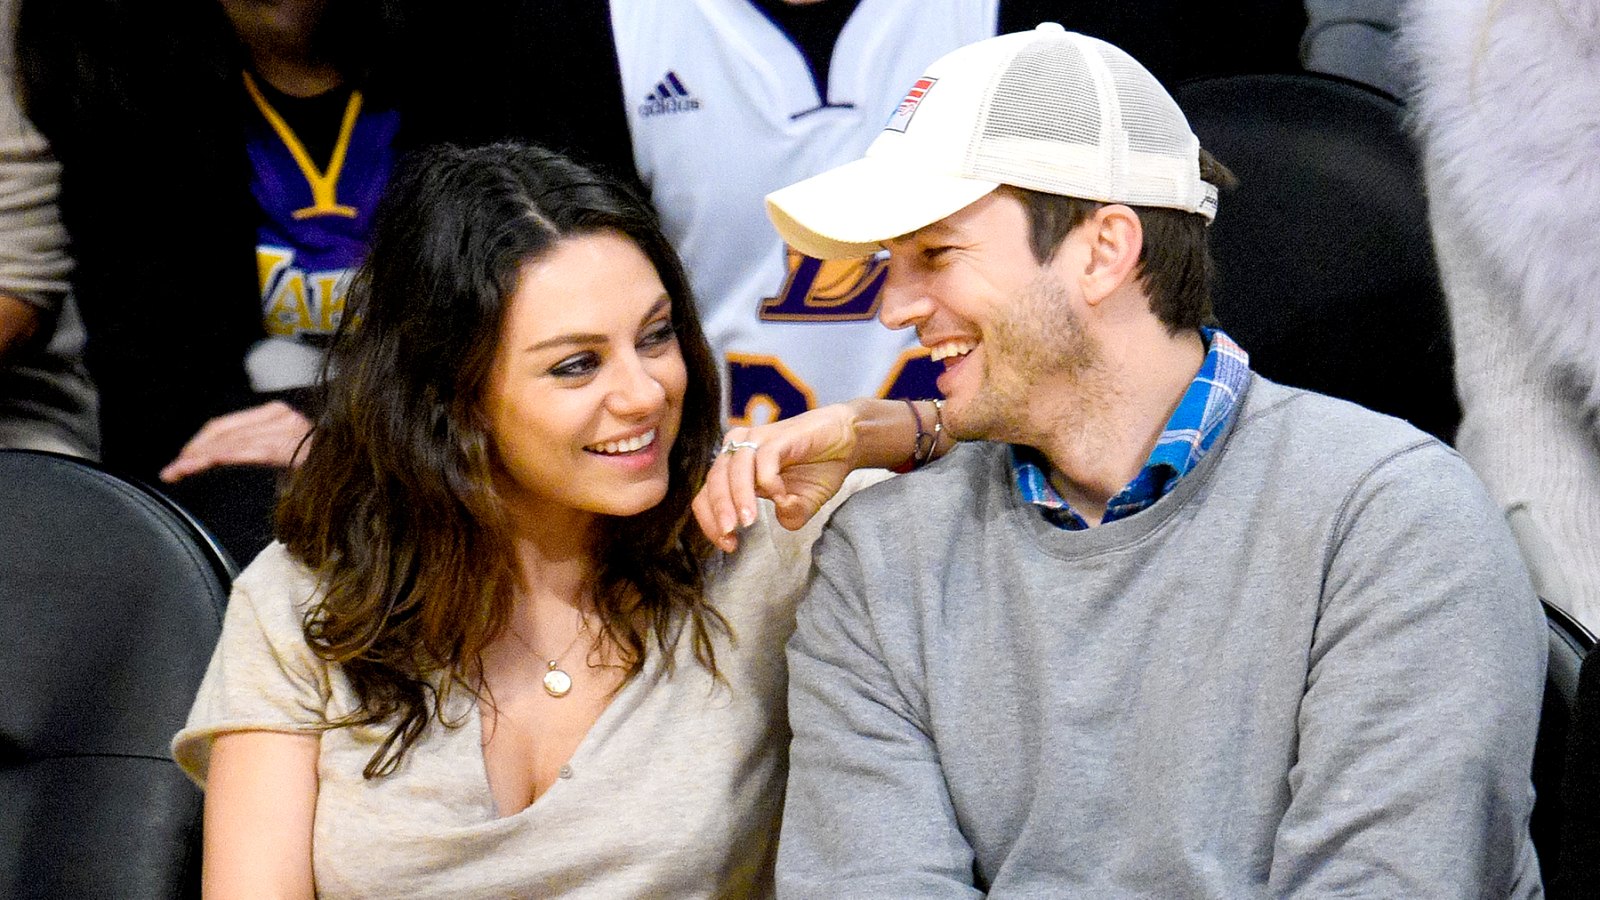 Mila Kunis and Ashton Kutcher attend a basketball game between the Oklahoma City Thunder and the Los Angeles Lakers at Staples Center in Los Angeles on December 19, 2014.